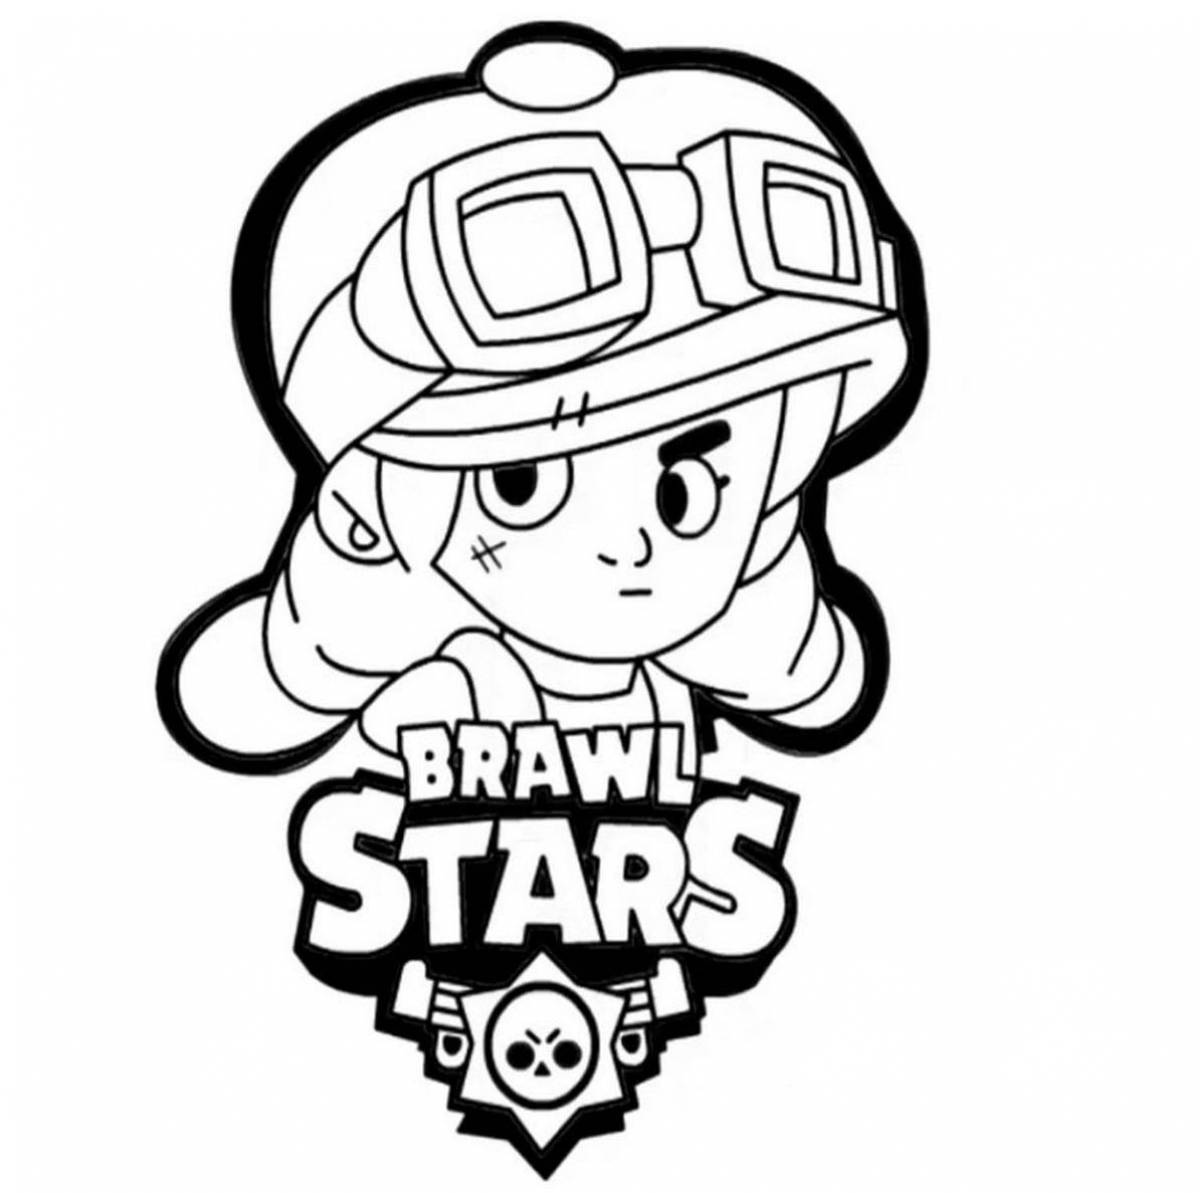 Exquisite coloring icons by brawl stars